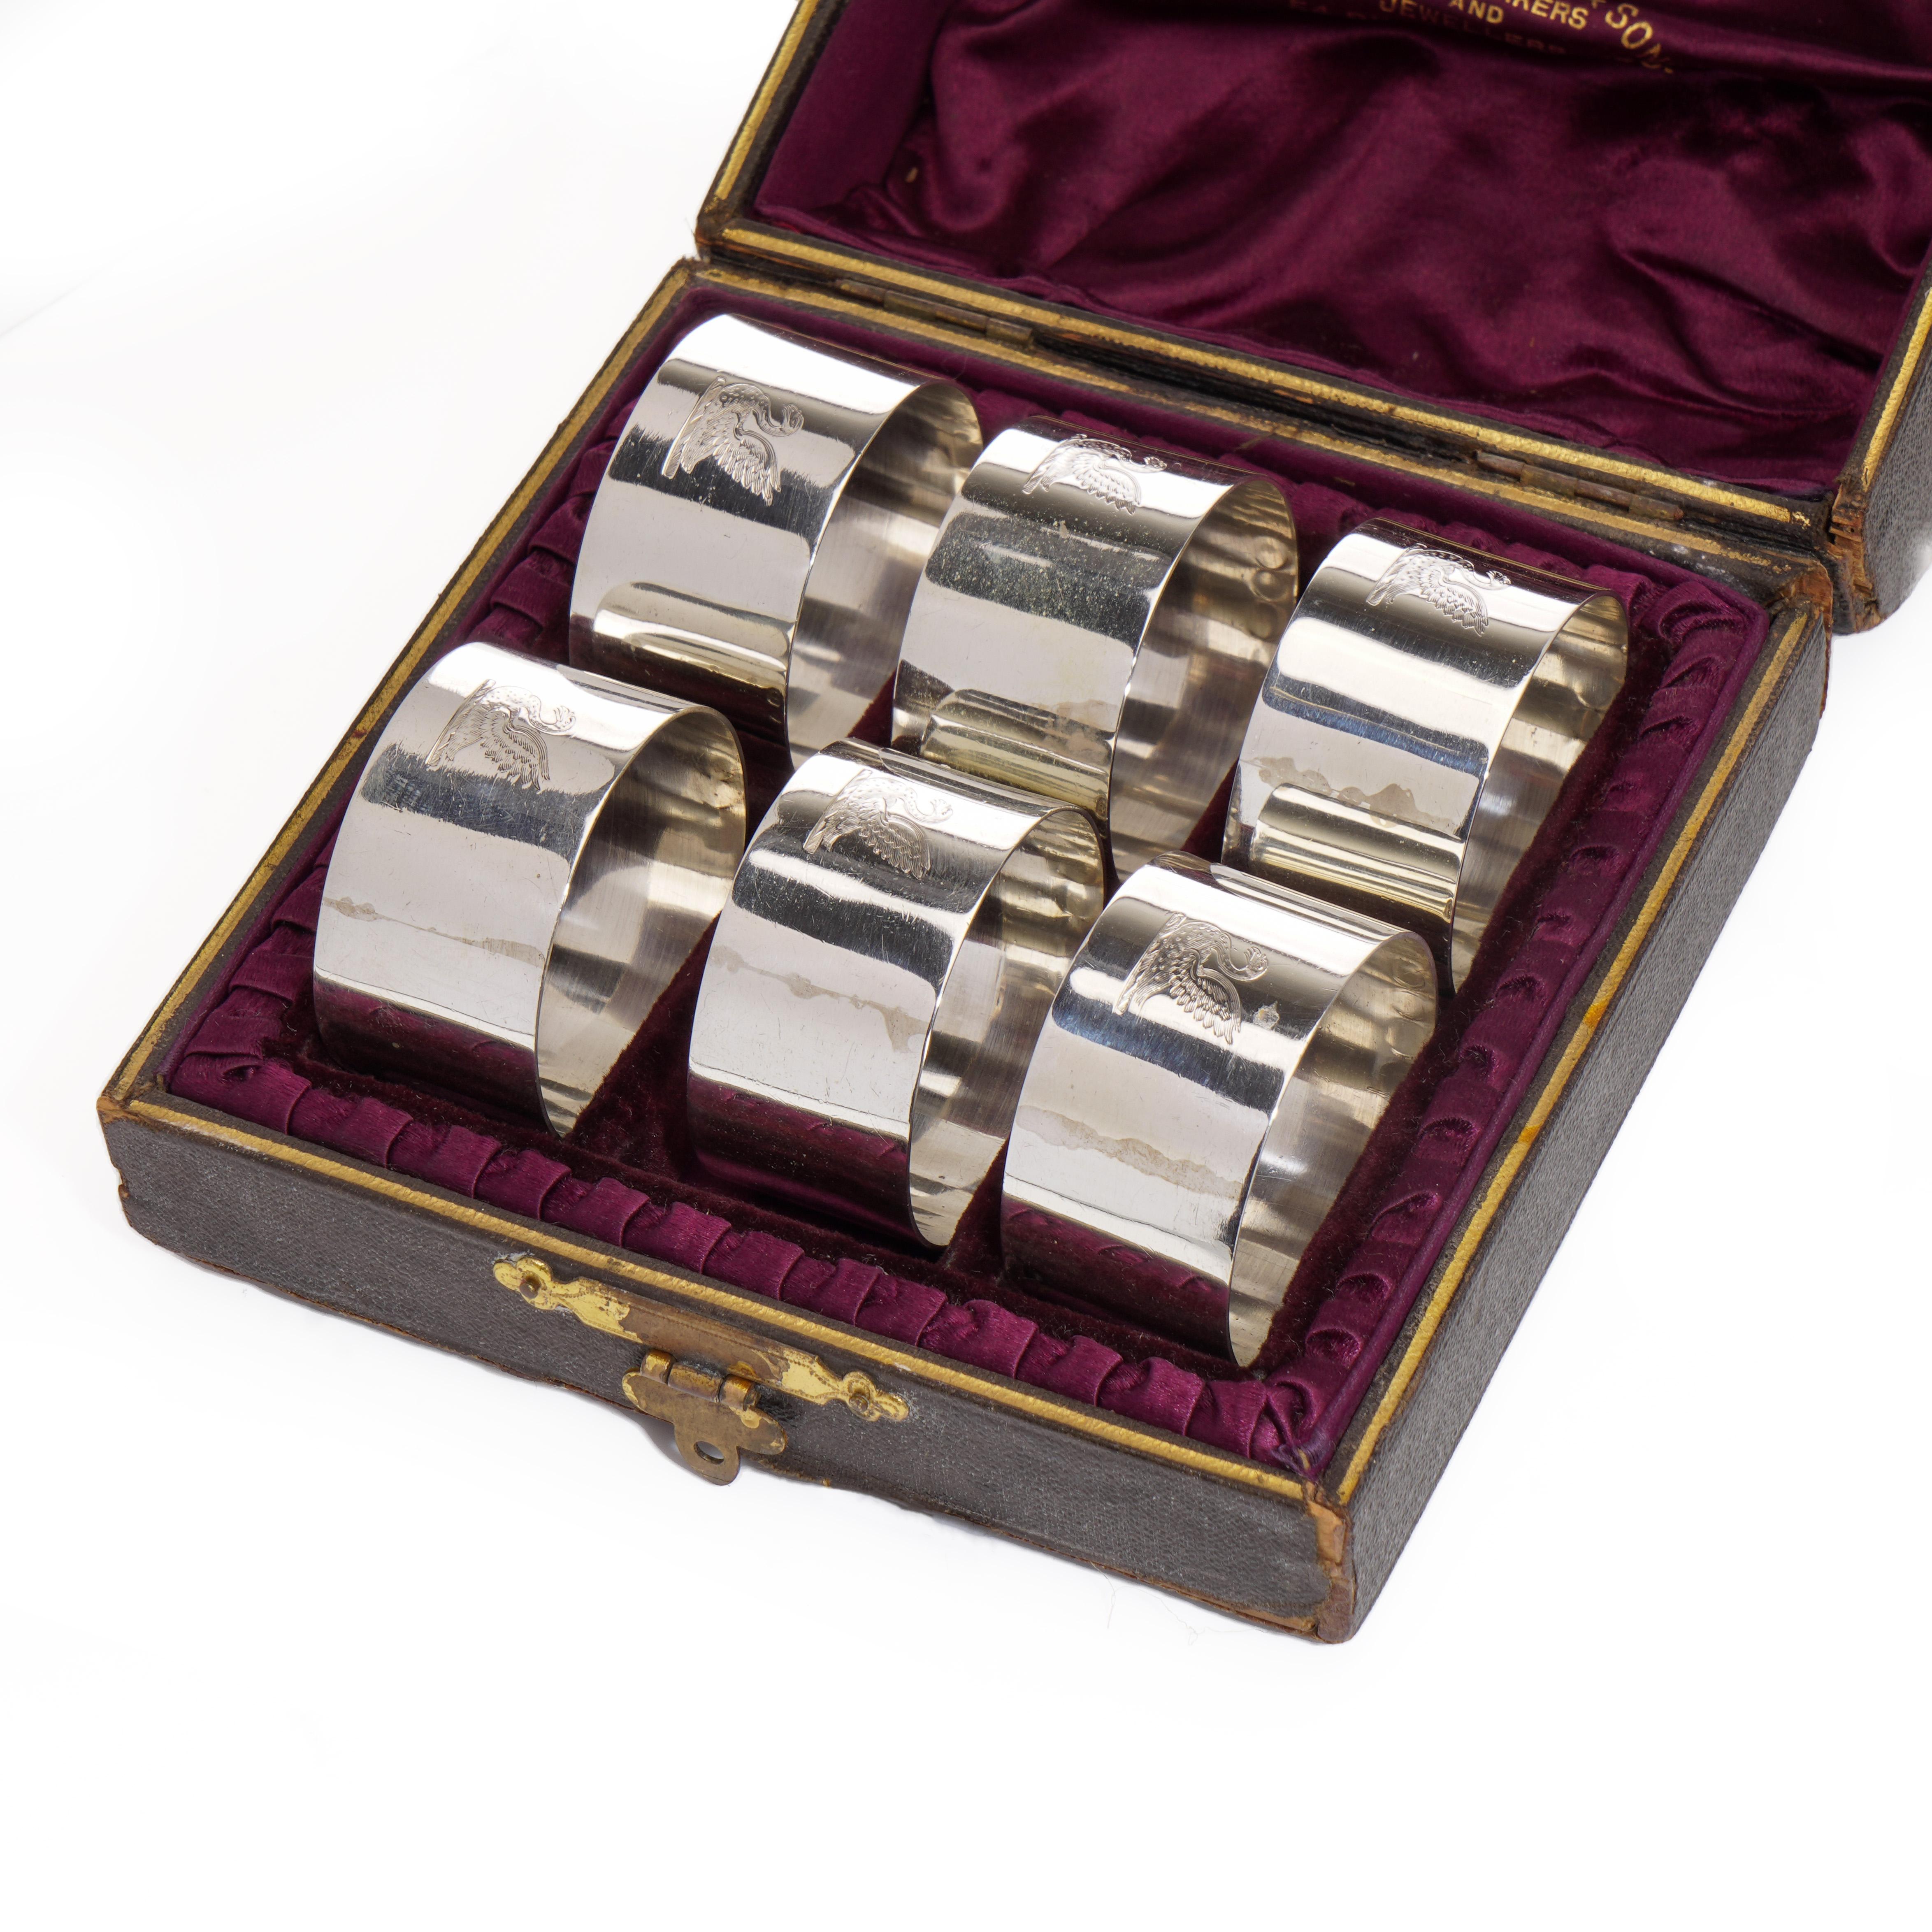 Antique Victorian sterling silver napkin ring set of 6 with swan design.
Made in England, Birmingham, 1893
Maker: Plante & Co
Fully hallmarked.

Dimensions:
Napkin ring: Diameter x height: 4.1 x 2.3 cm
Weight: 115 grams
With box: 268